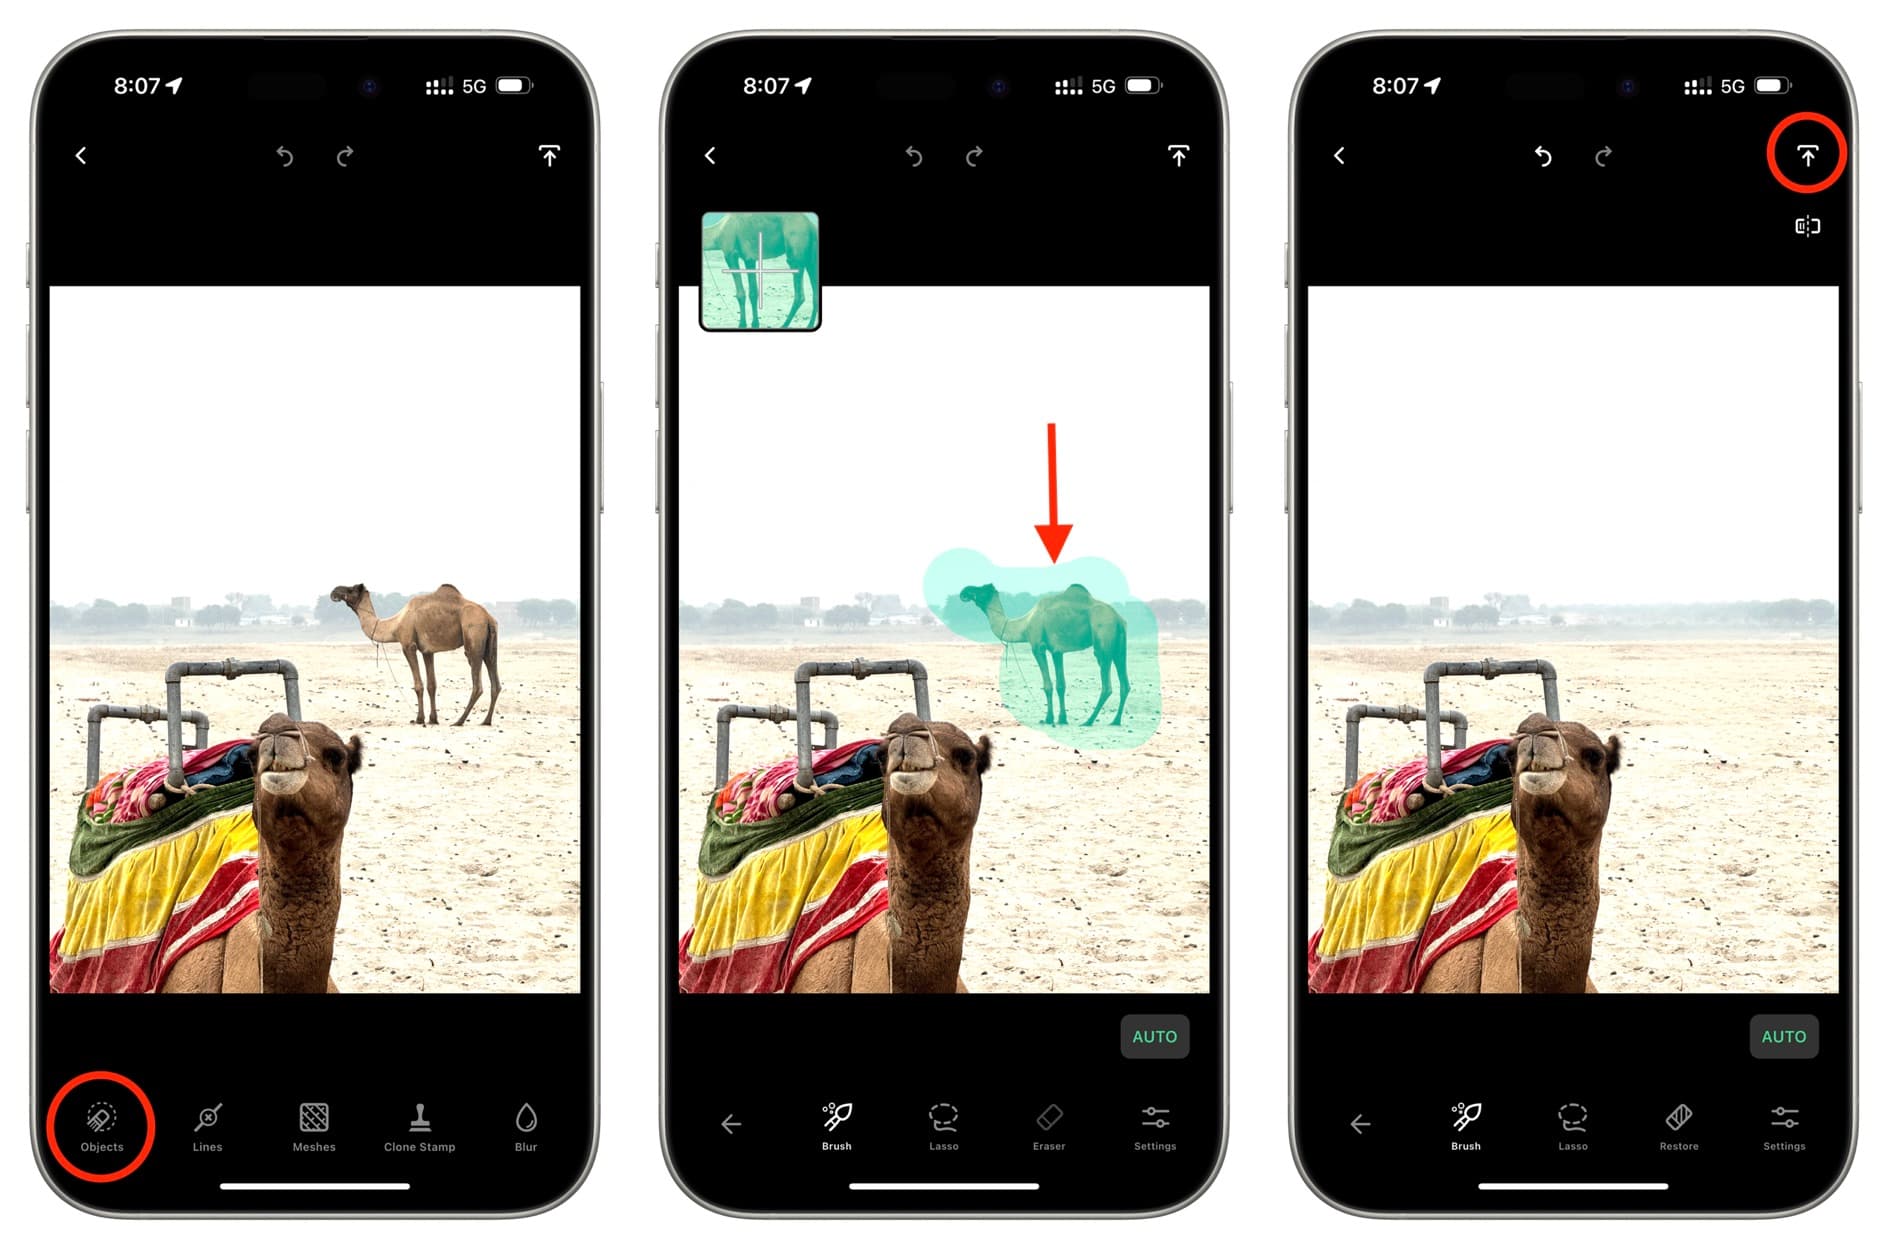 Remove unwanted object from picture using Retouch app on iPhone